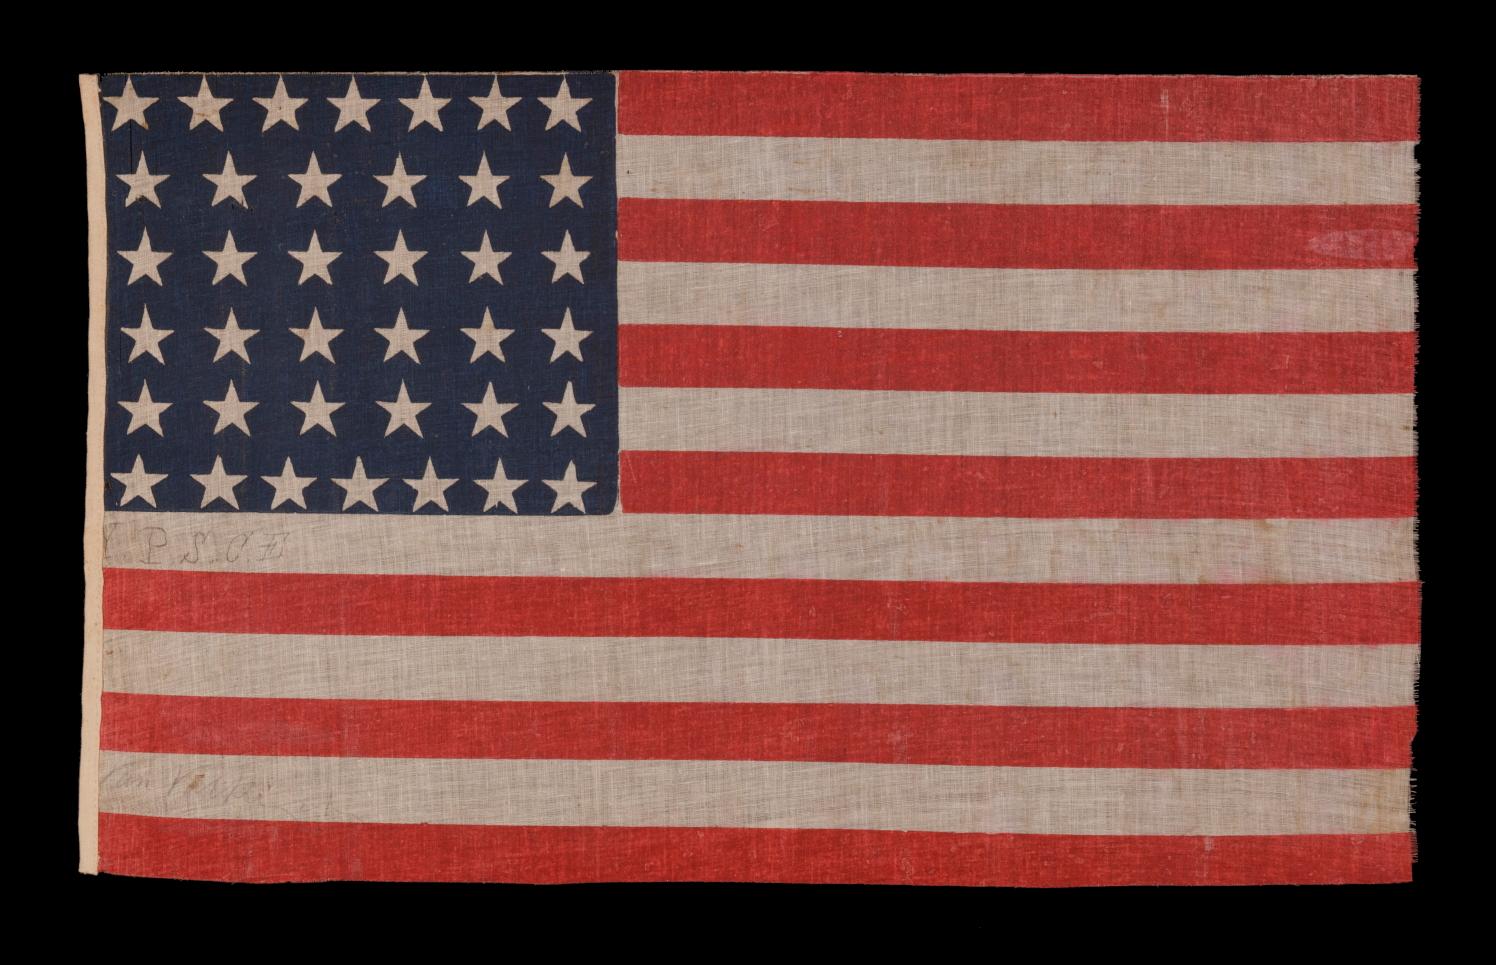 38 STAR ANTIQUE AMERICAN FLAG, MADE DURING THE PERIOD WHEN COLORADO WAS THE MOST RECENT STATE TO JOIN THE UNION, 1876-1889, WITH PENCILED INSCRIPTION FROM THE YOUNG PEOPLE'S SOCIETY OF CHRISTIAN ENDEAVOR (YPSCE), EX-RICHARD PIERCE COLLECTION OF